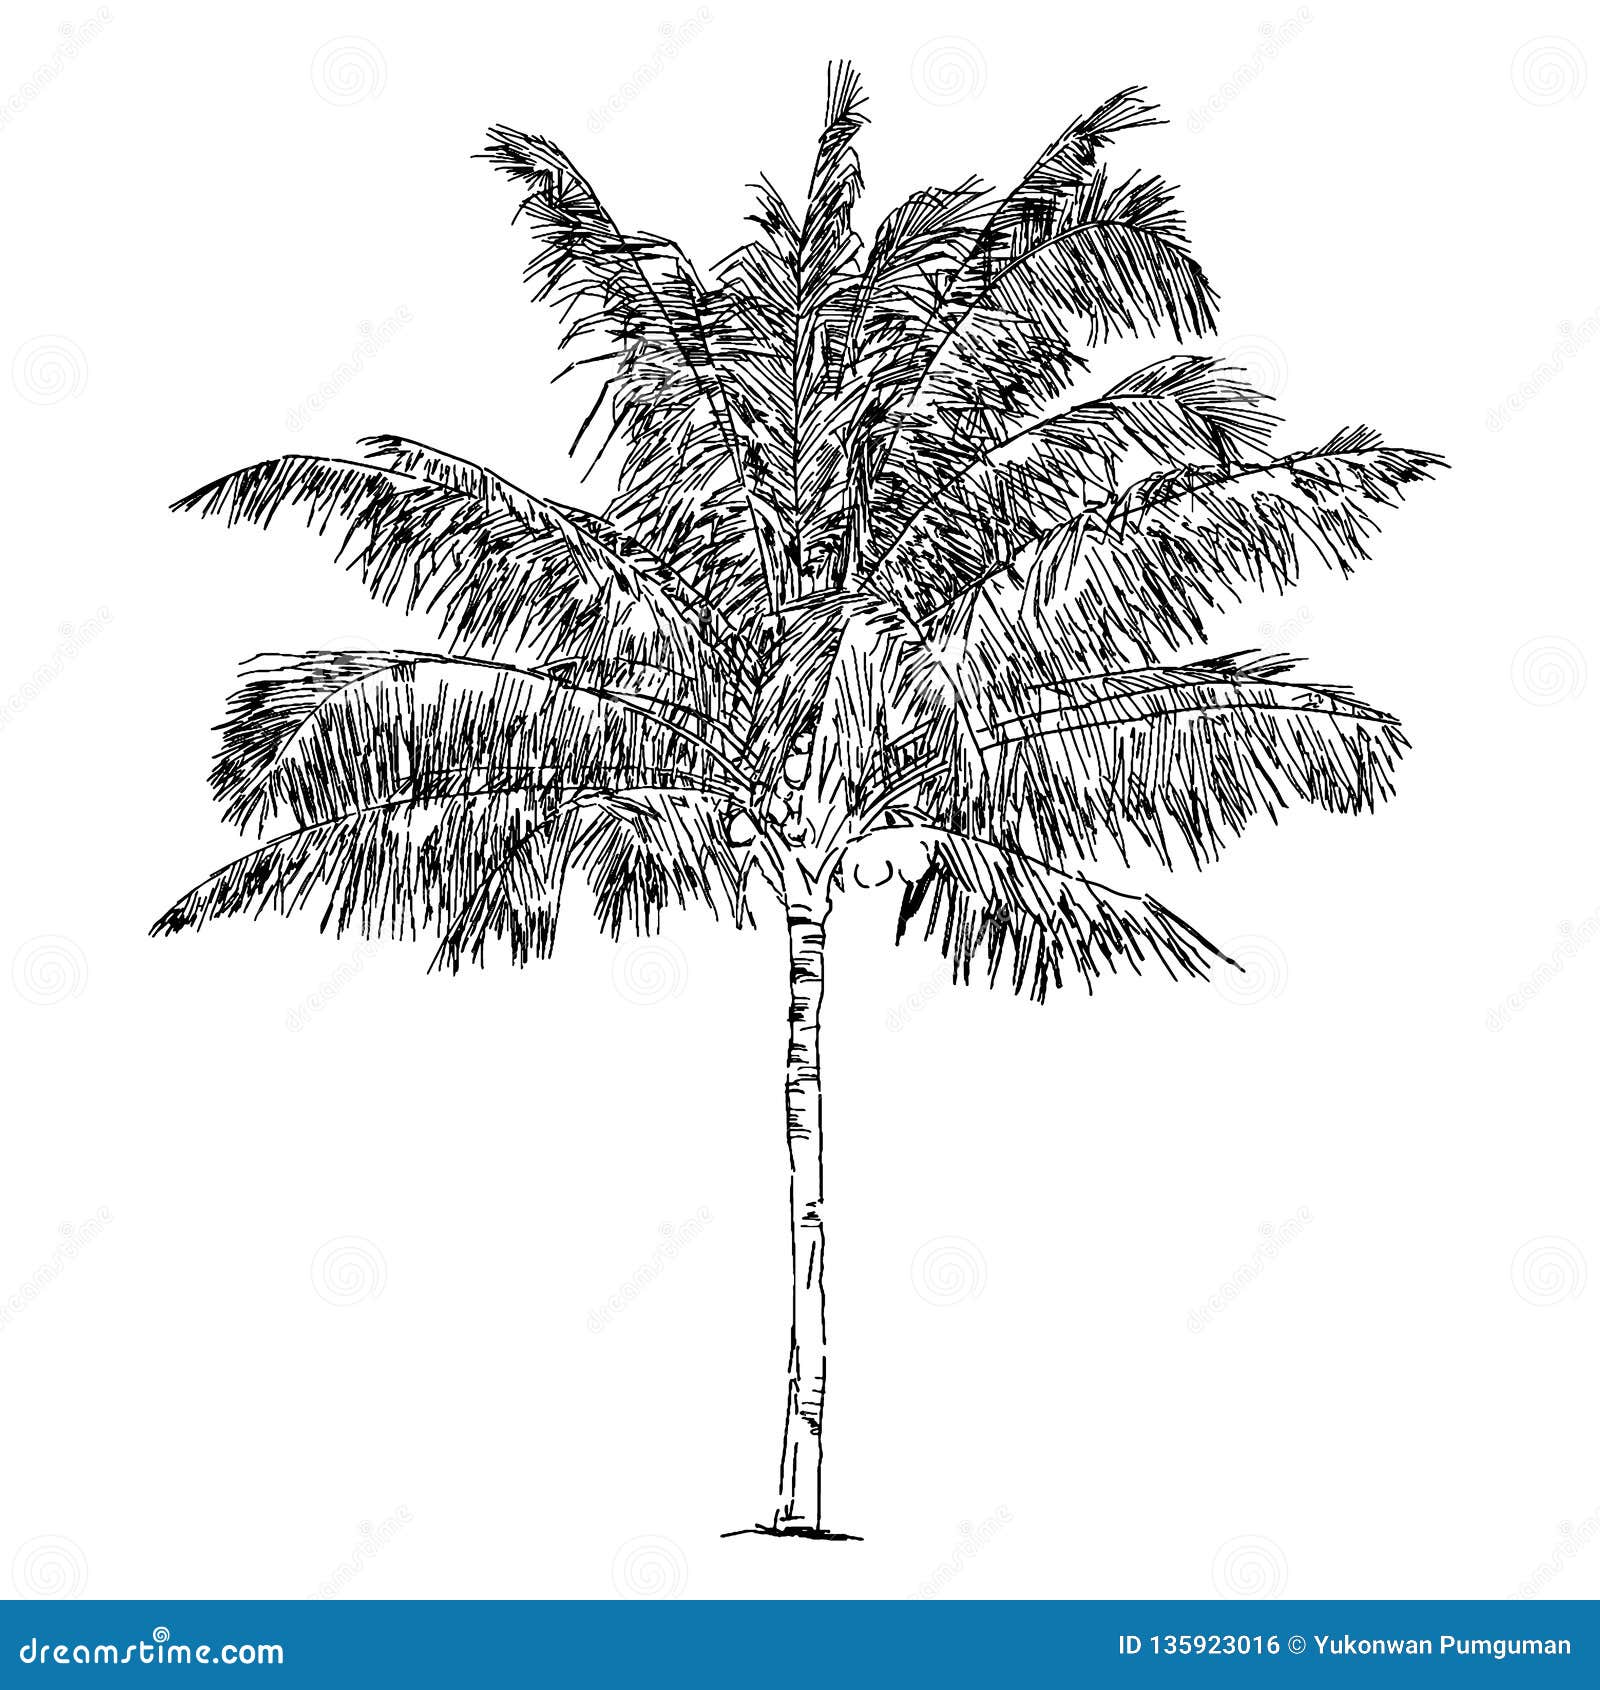 Tree Sketch Stock Photos and Images  123RF